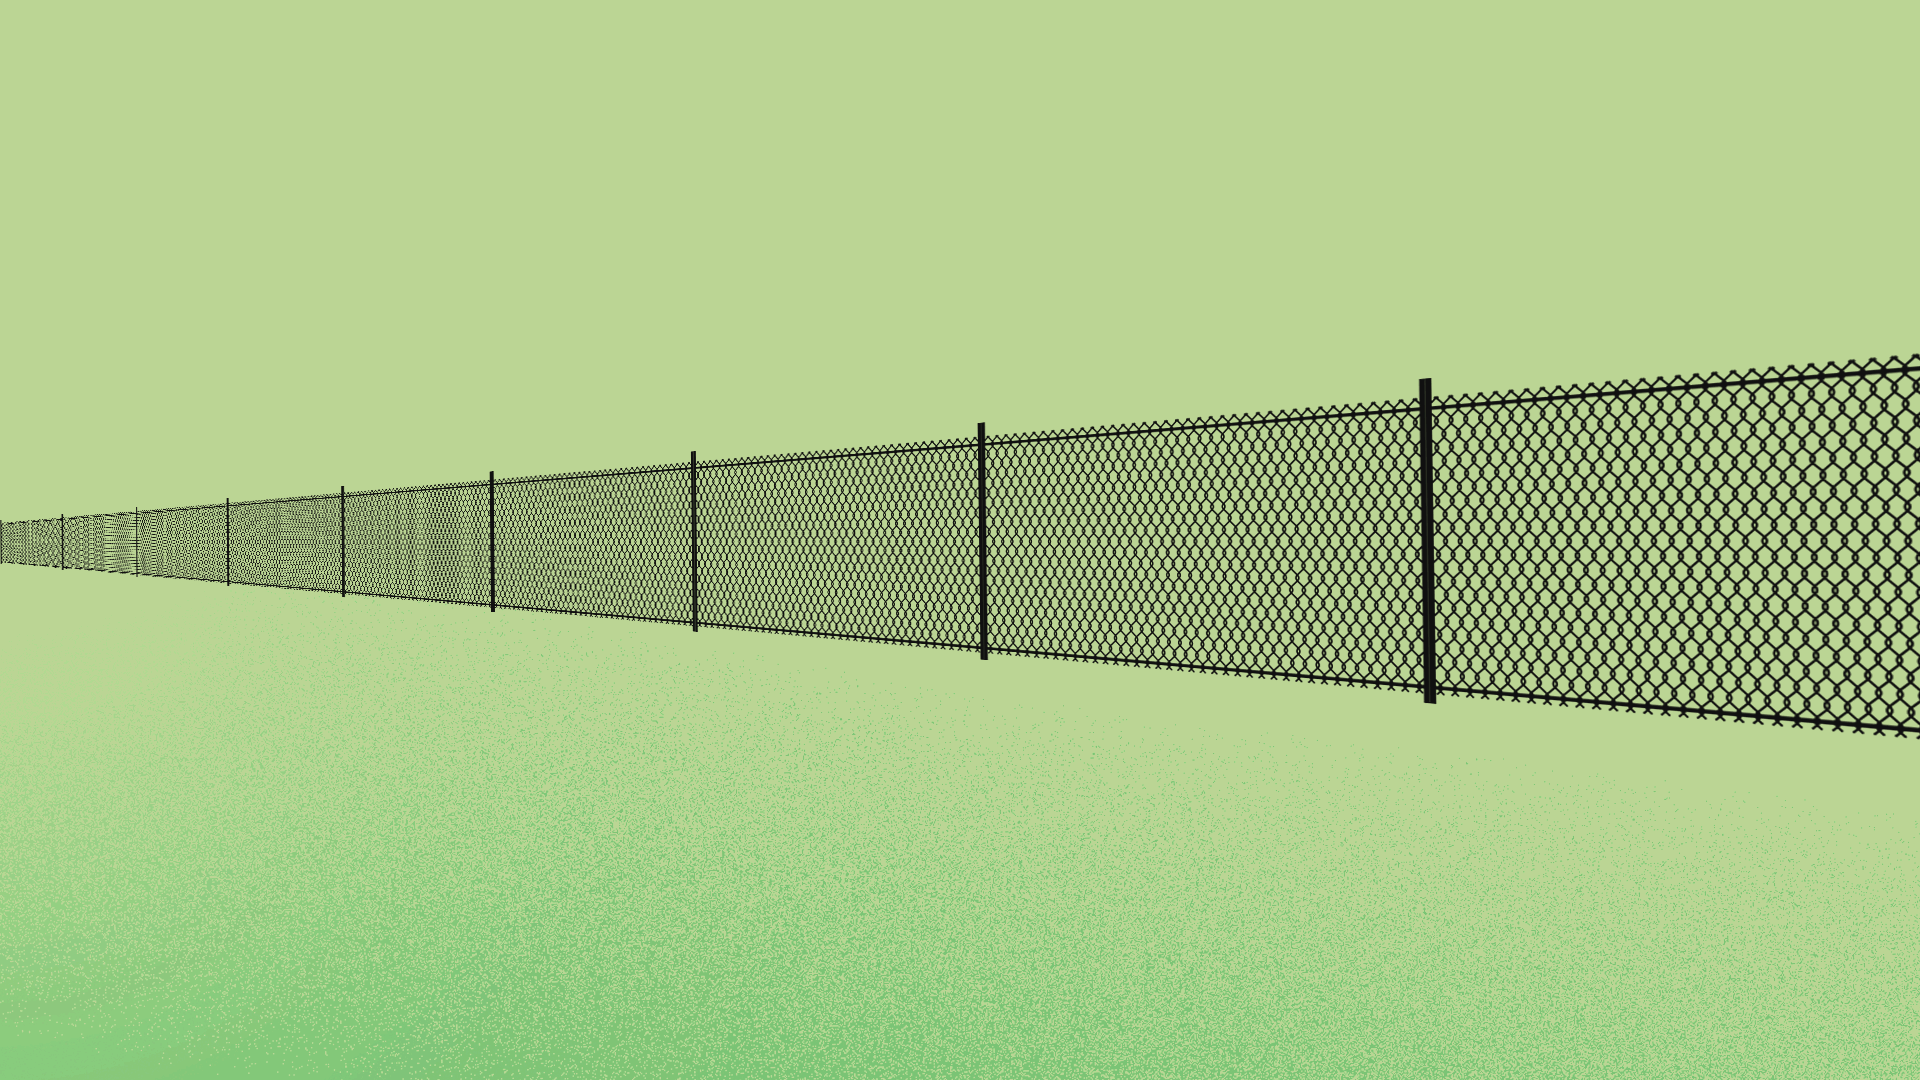 Animated illustration of a crypto coin bouncing over a chain-link fence. 